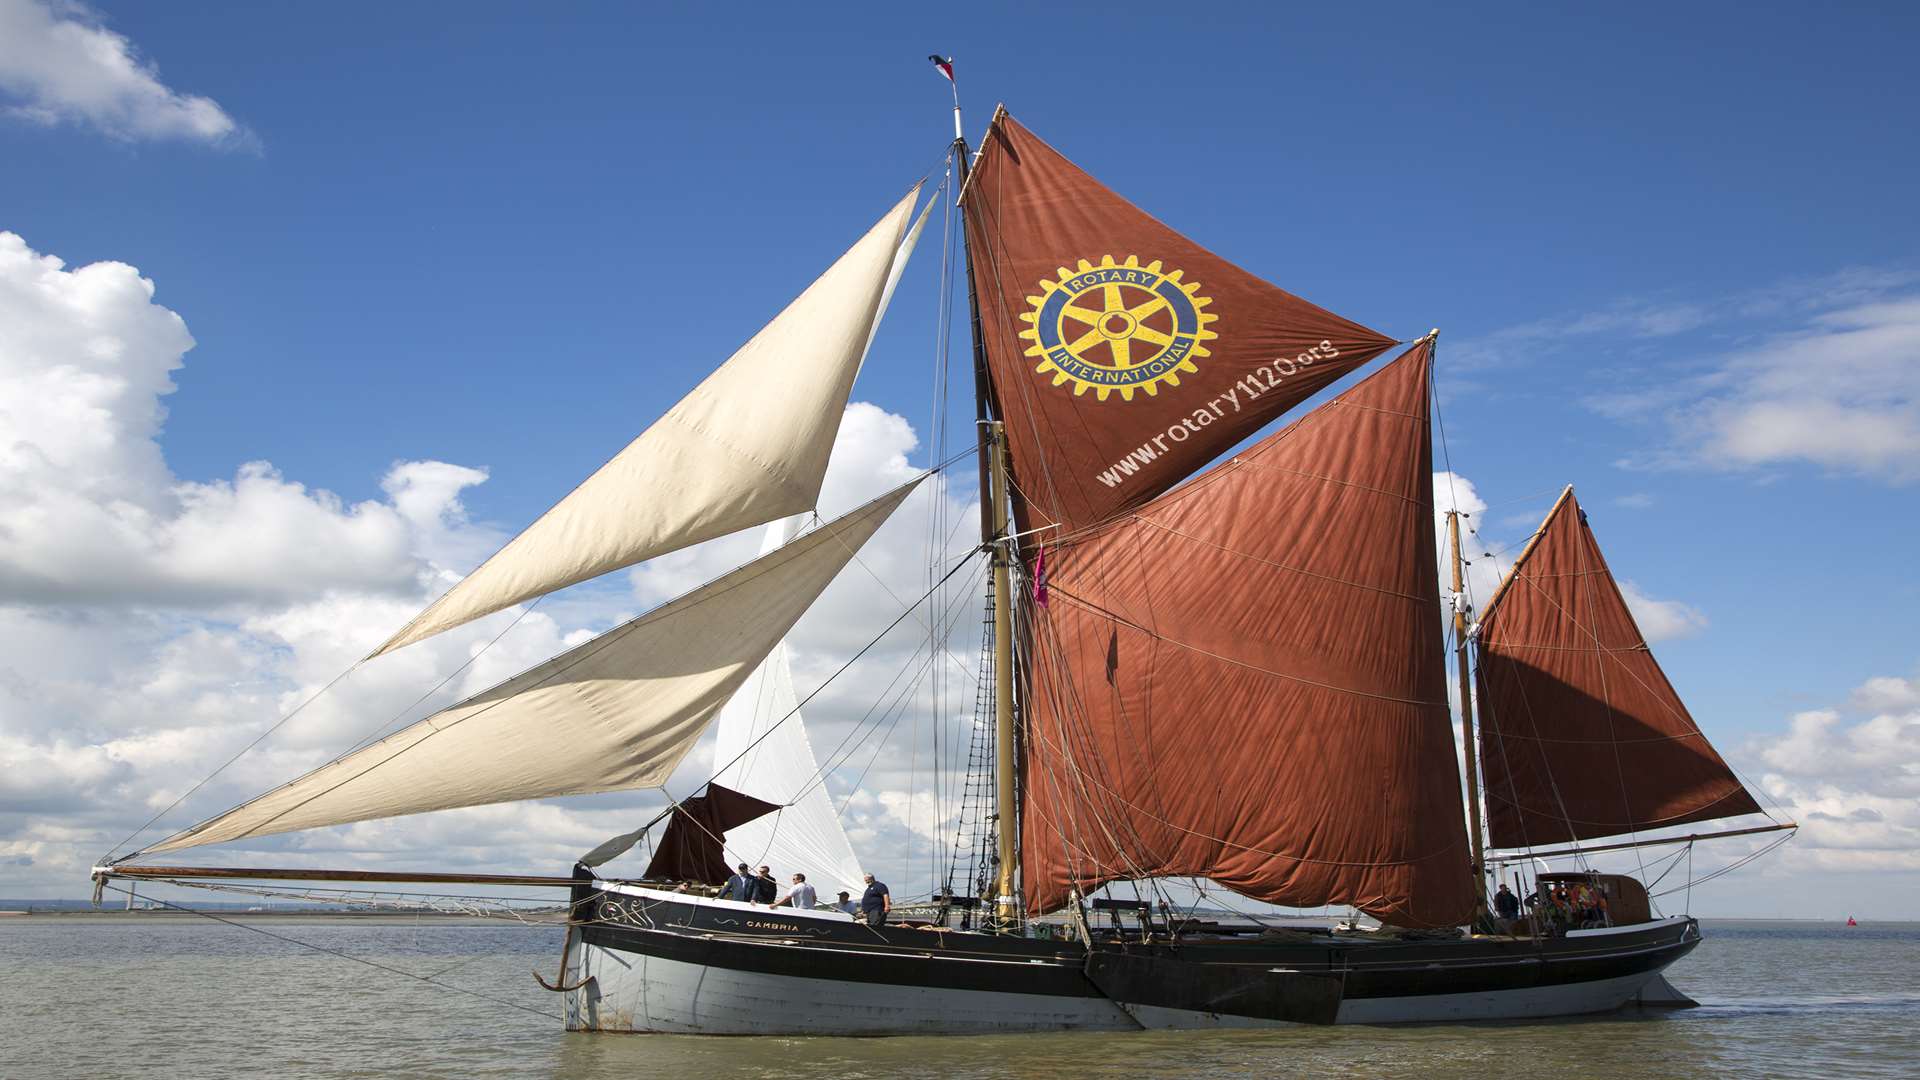 The sailing barge Cambria has come to Medway for the winter